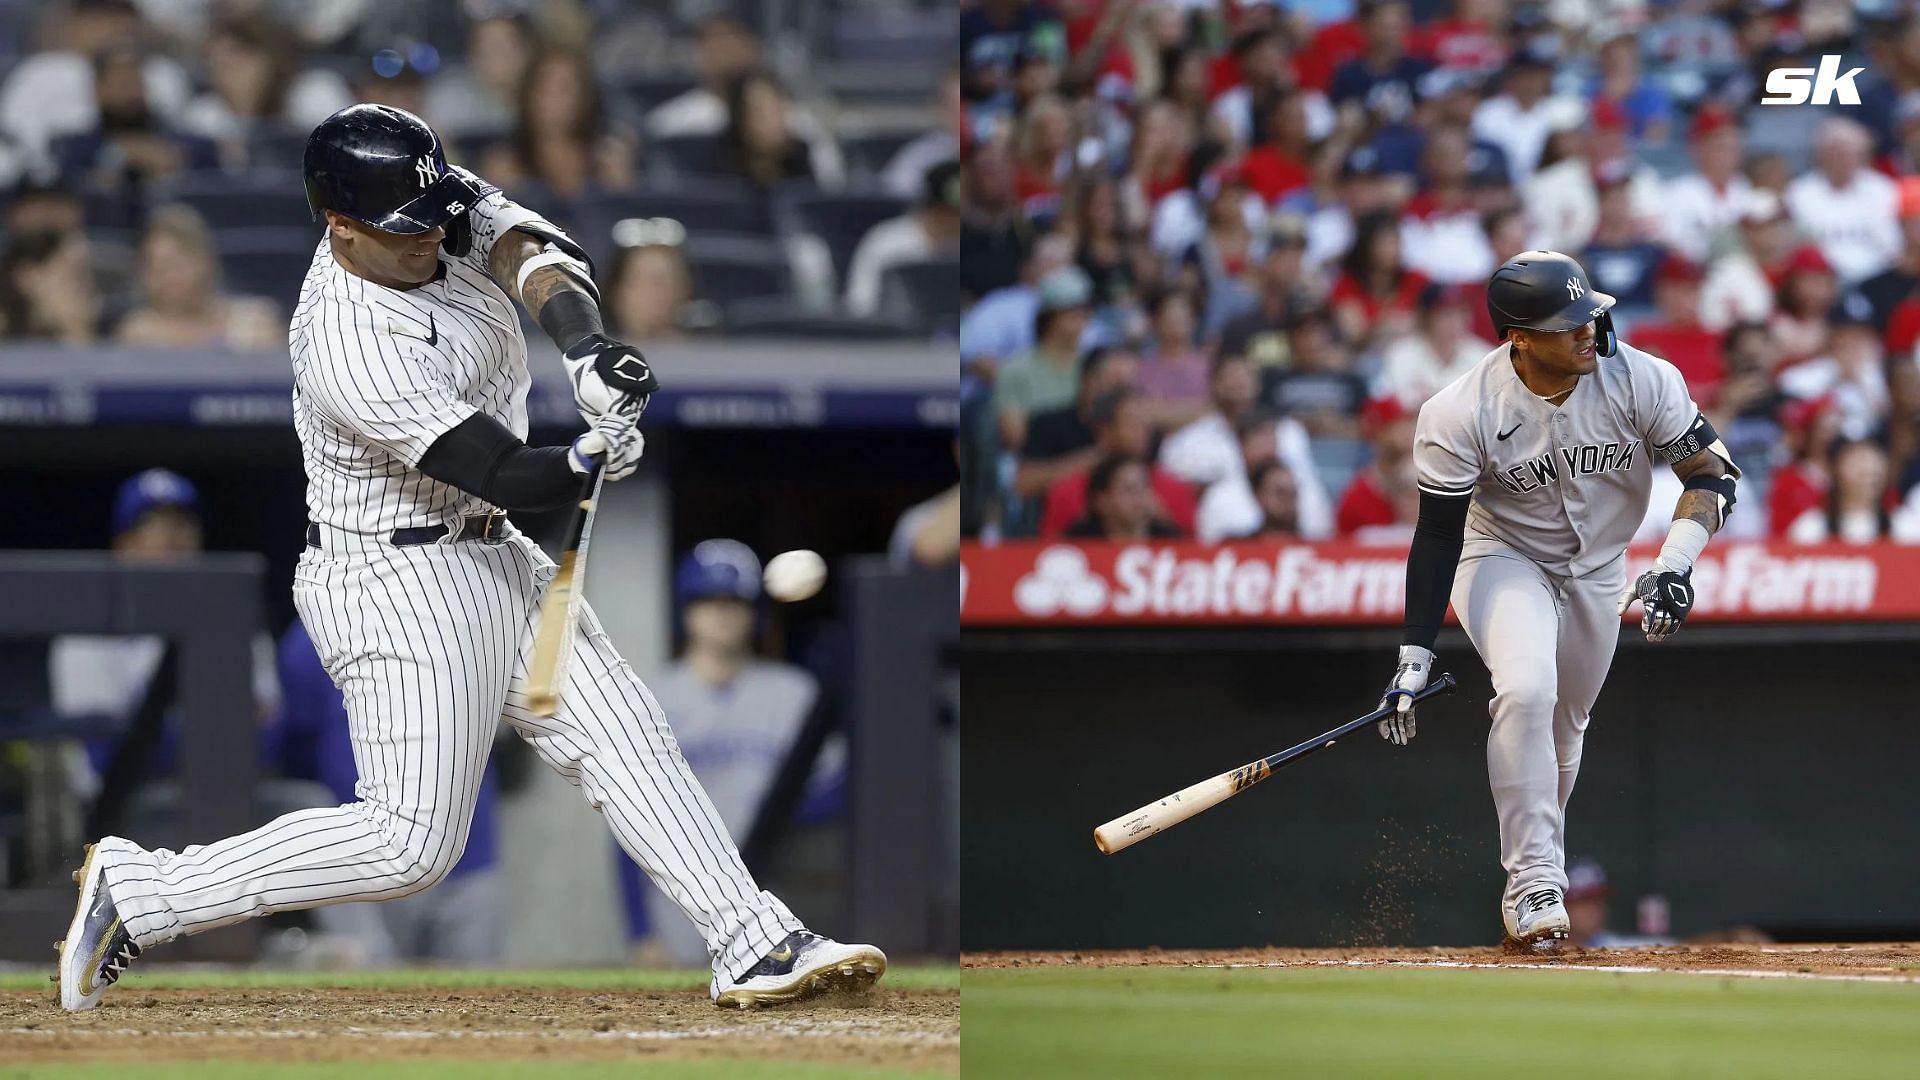 Gleyber Torres Contract: New York Yankees GM Brian Cashman says no extension talks have taken place